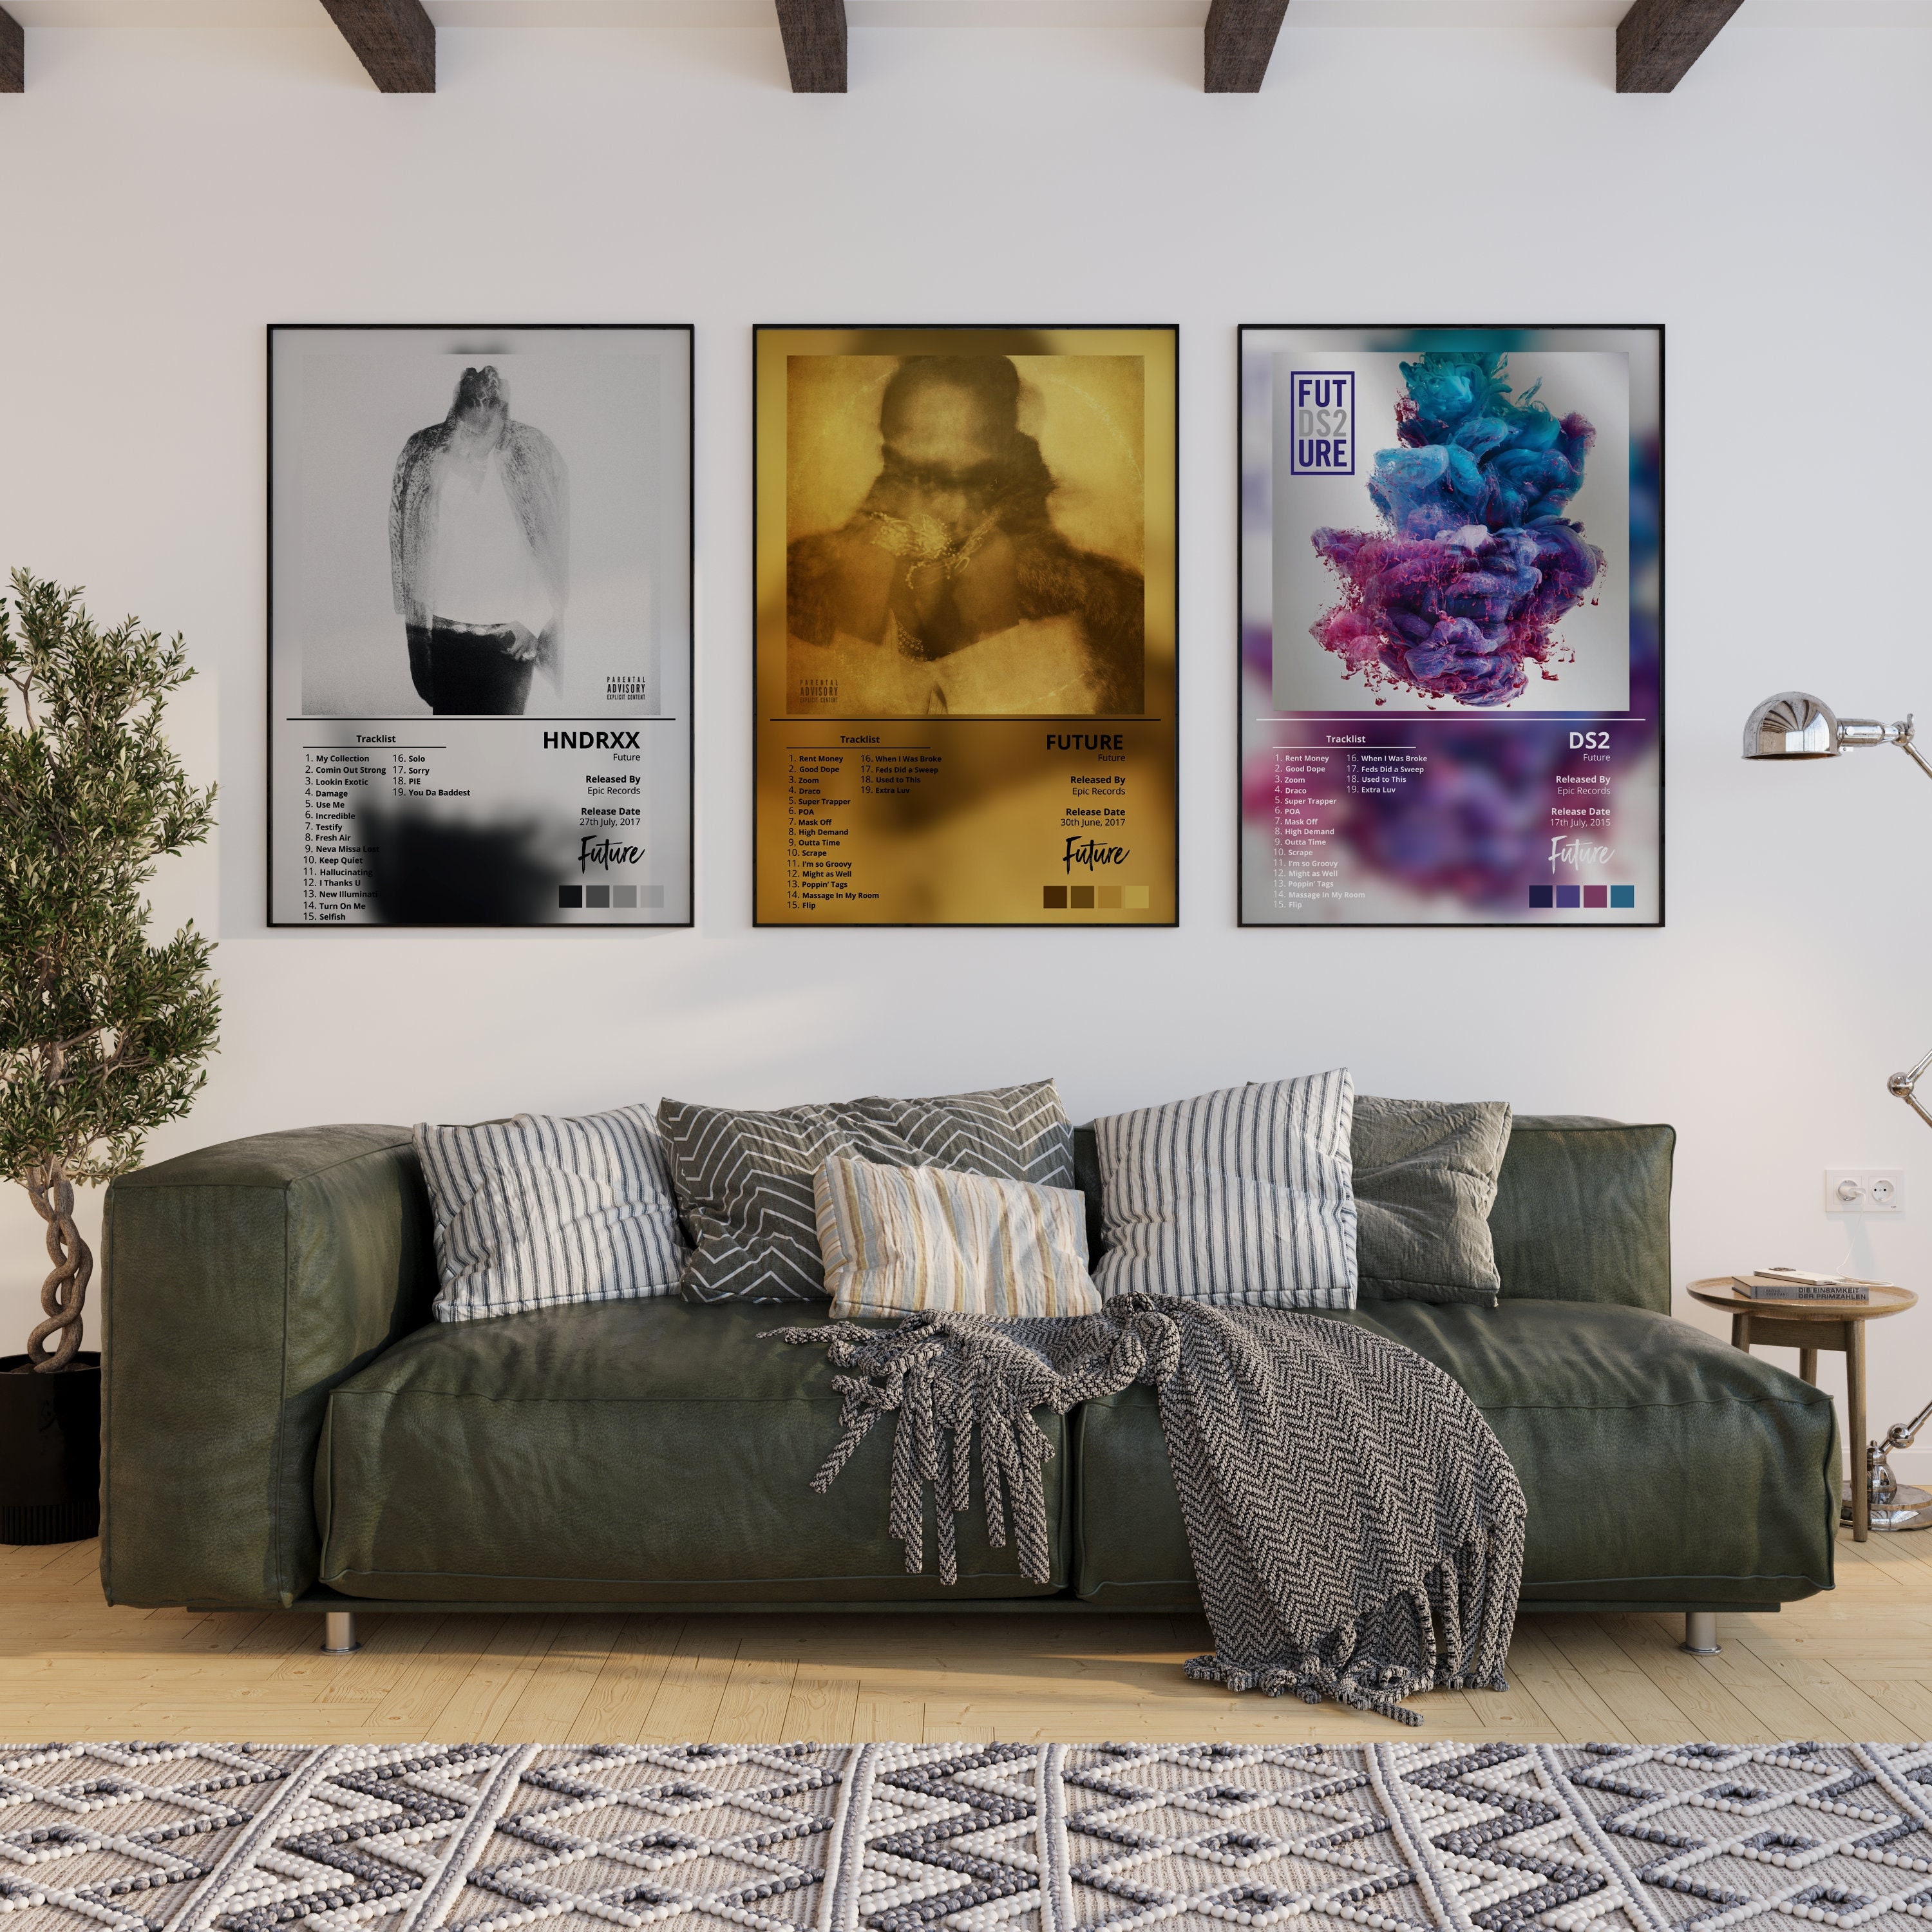 Pop Music Album Cover Aesthetic Pictures France Singer Future Nekfeu Posters  for Room Bar Canvas Painting Art Wall Home Decor